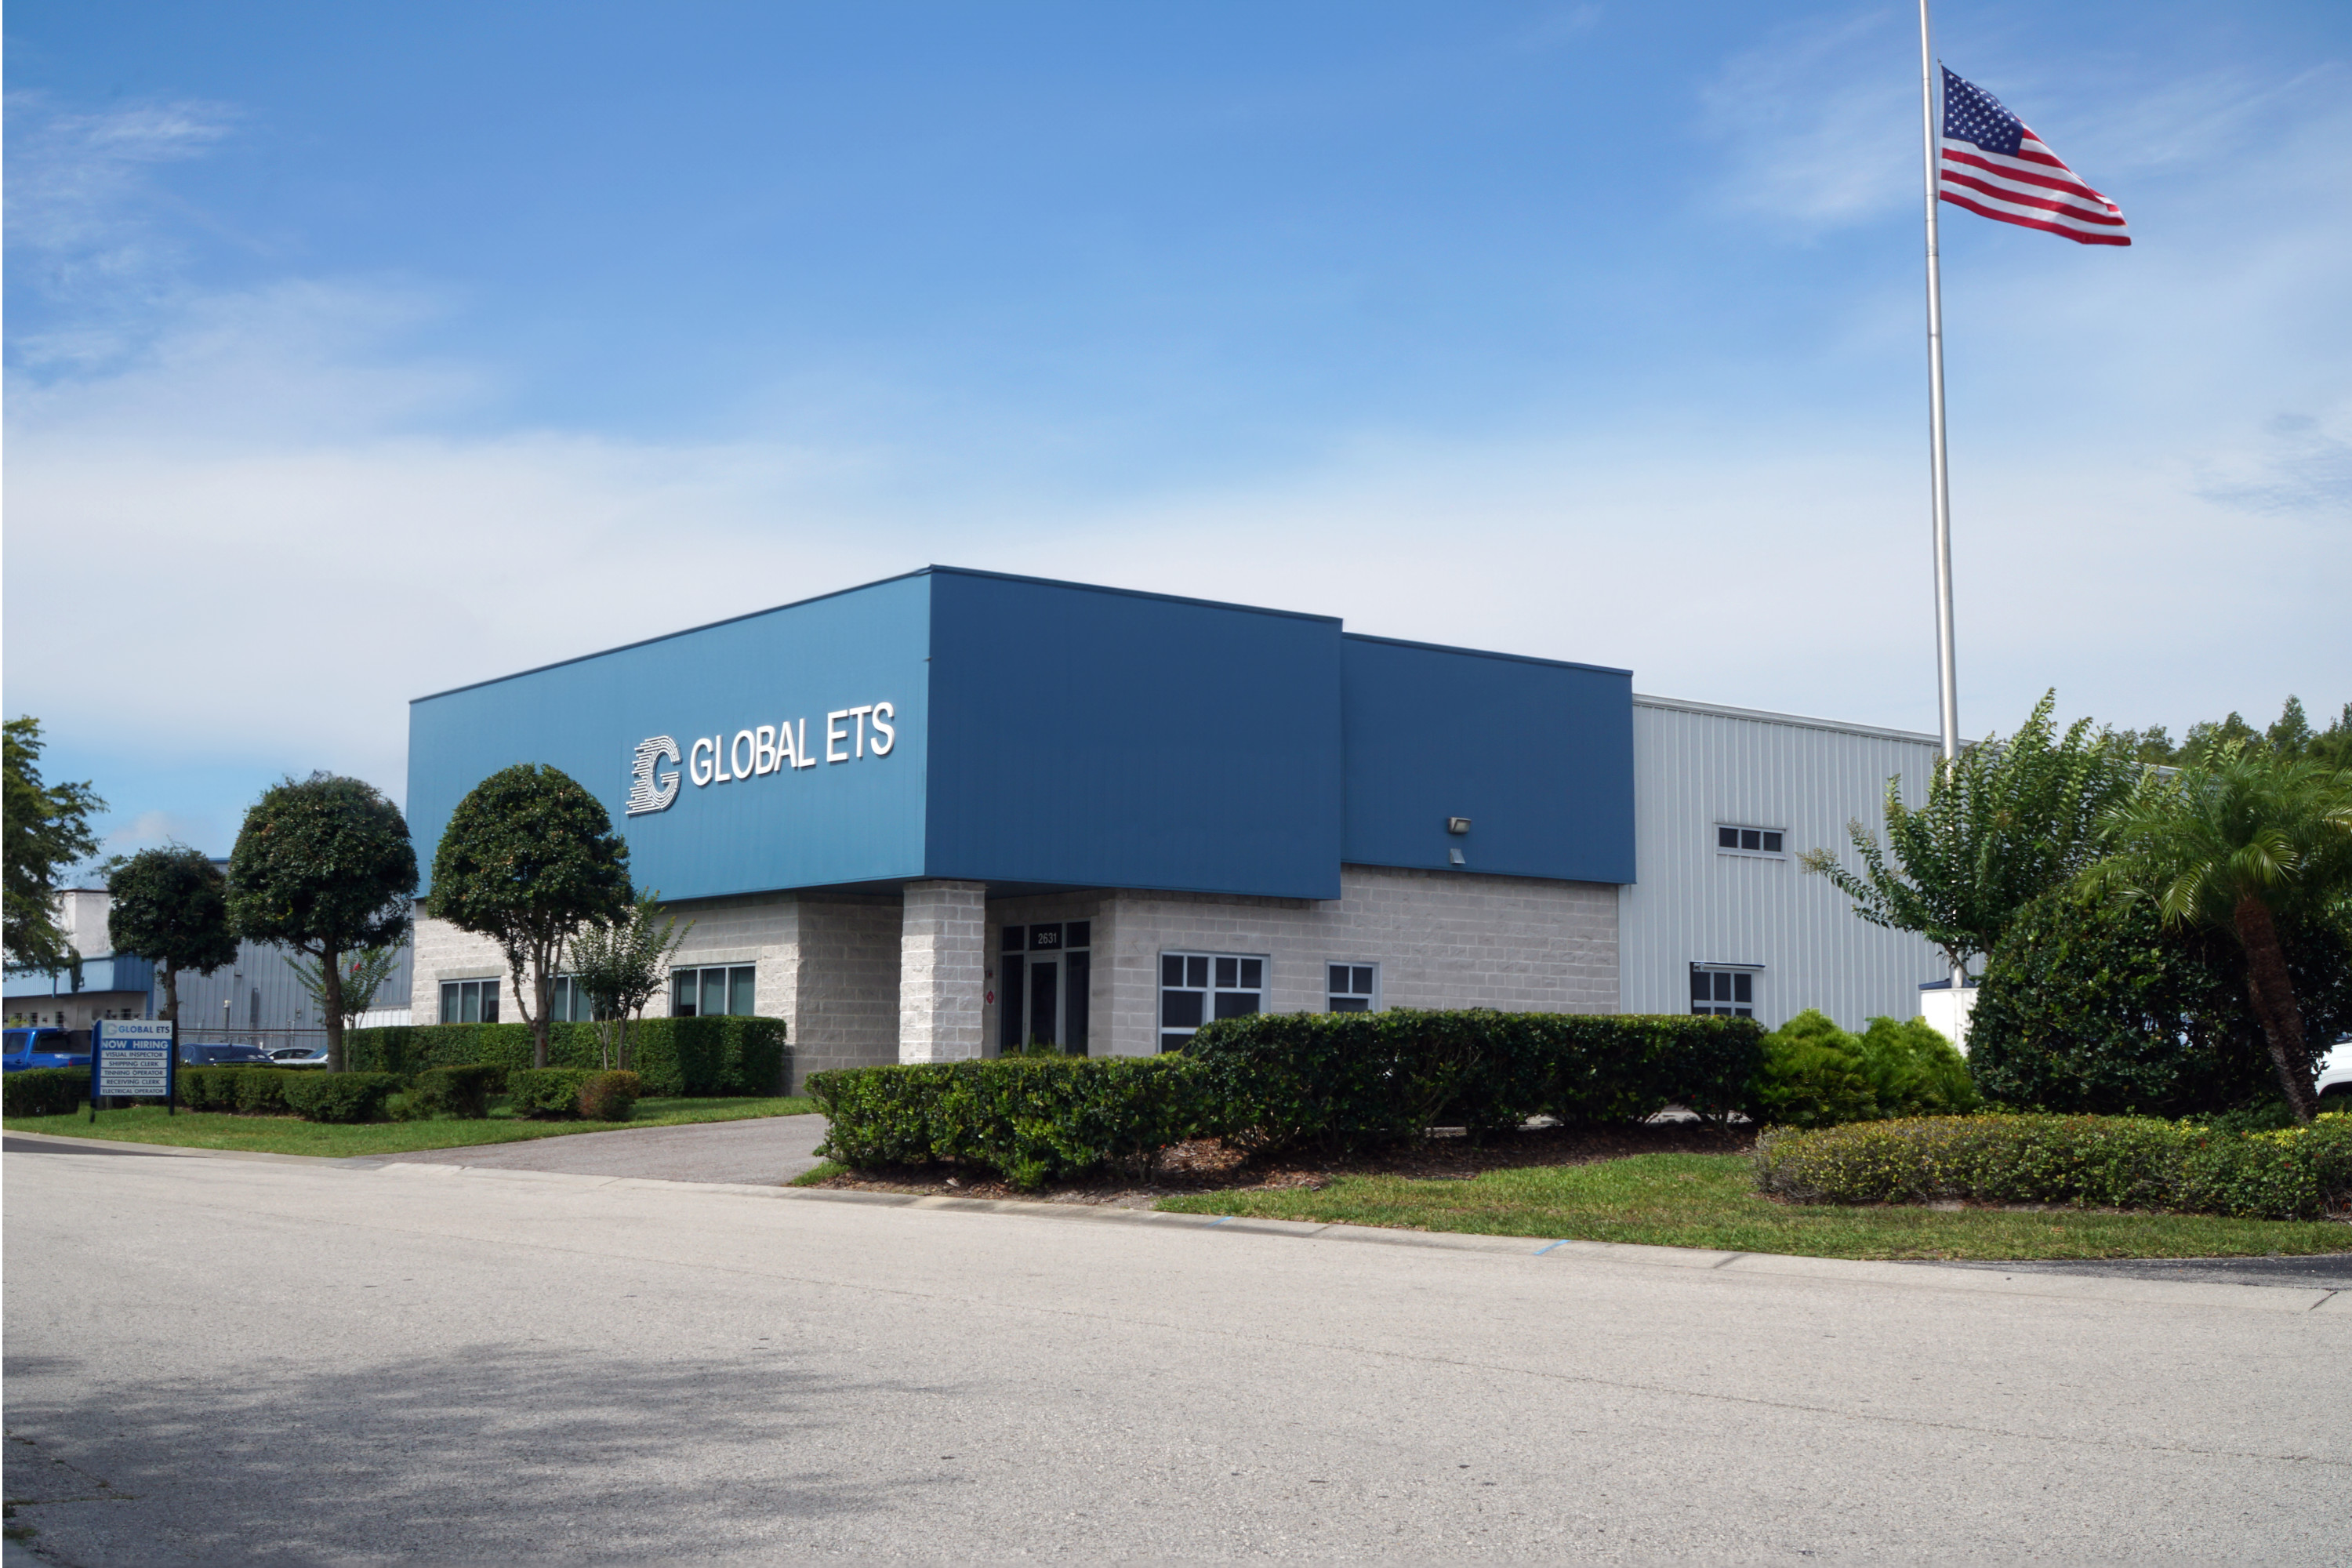 Exterior view of a gray and blue industrial building with a sign reading 'Global ETS' and an American flag flying on a pole. 